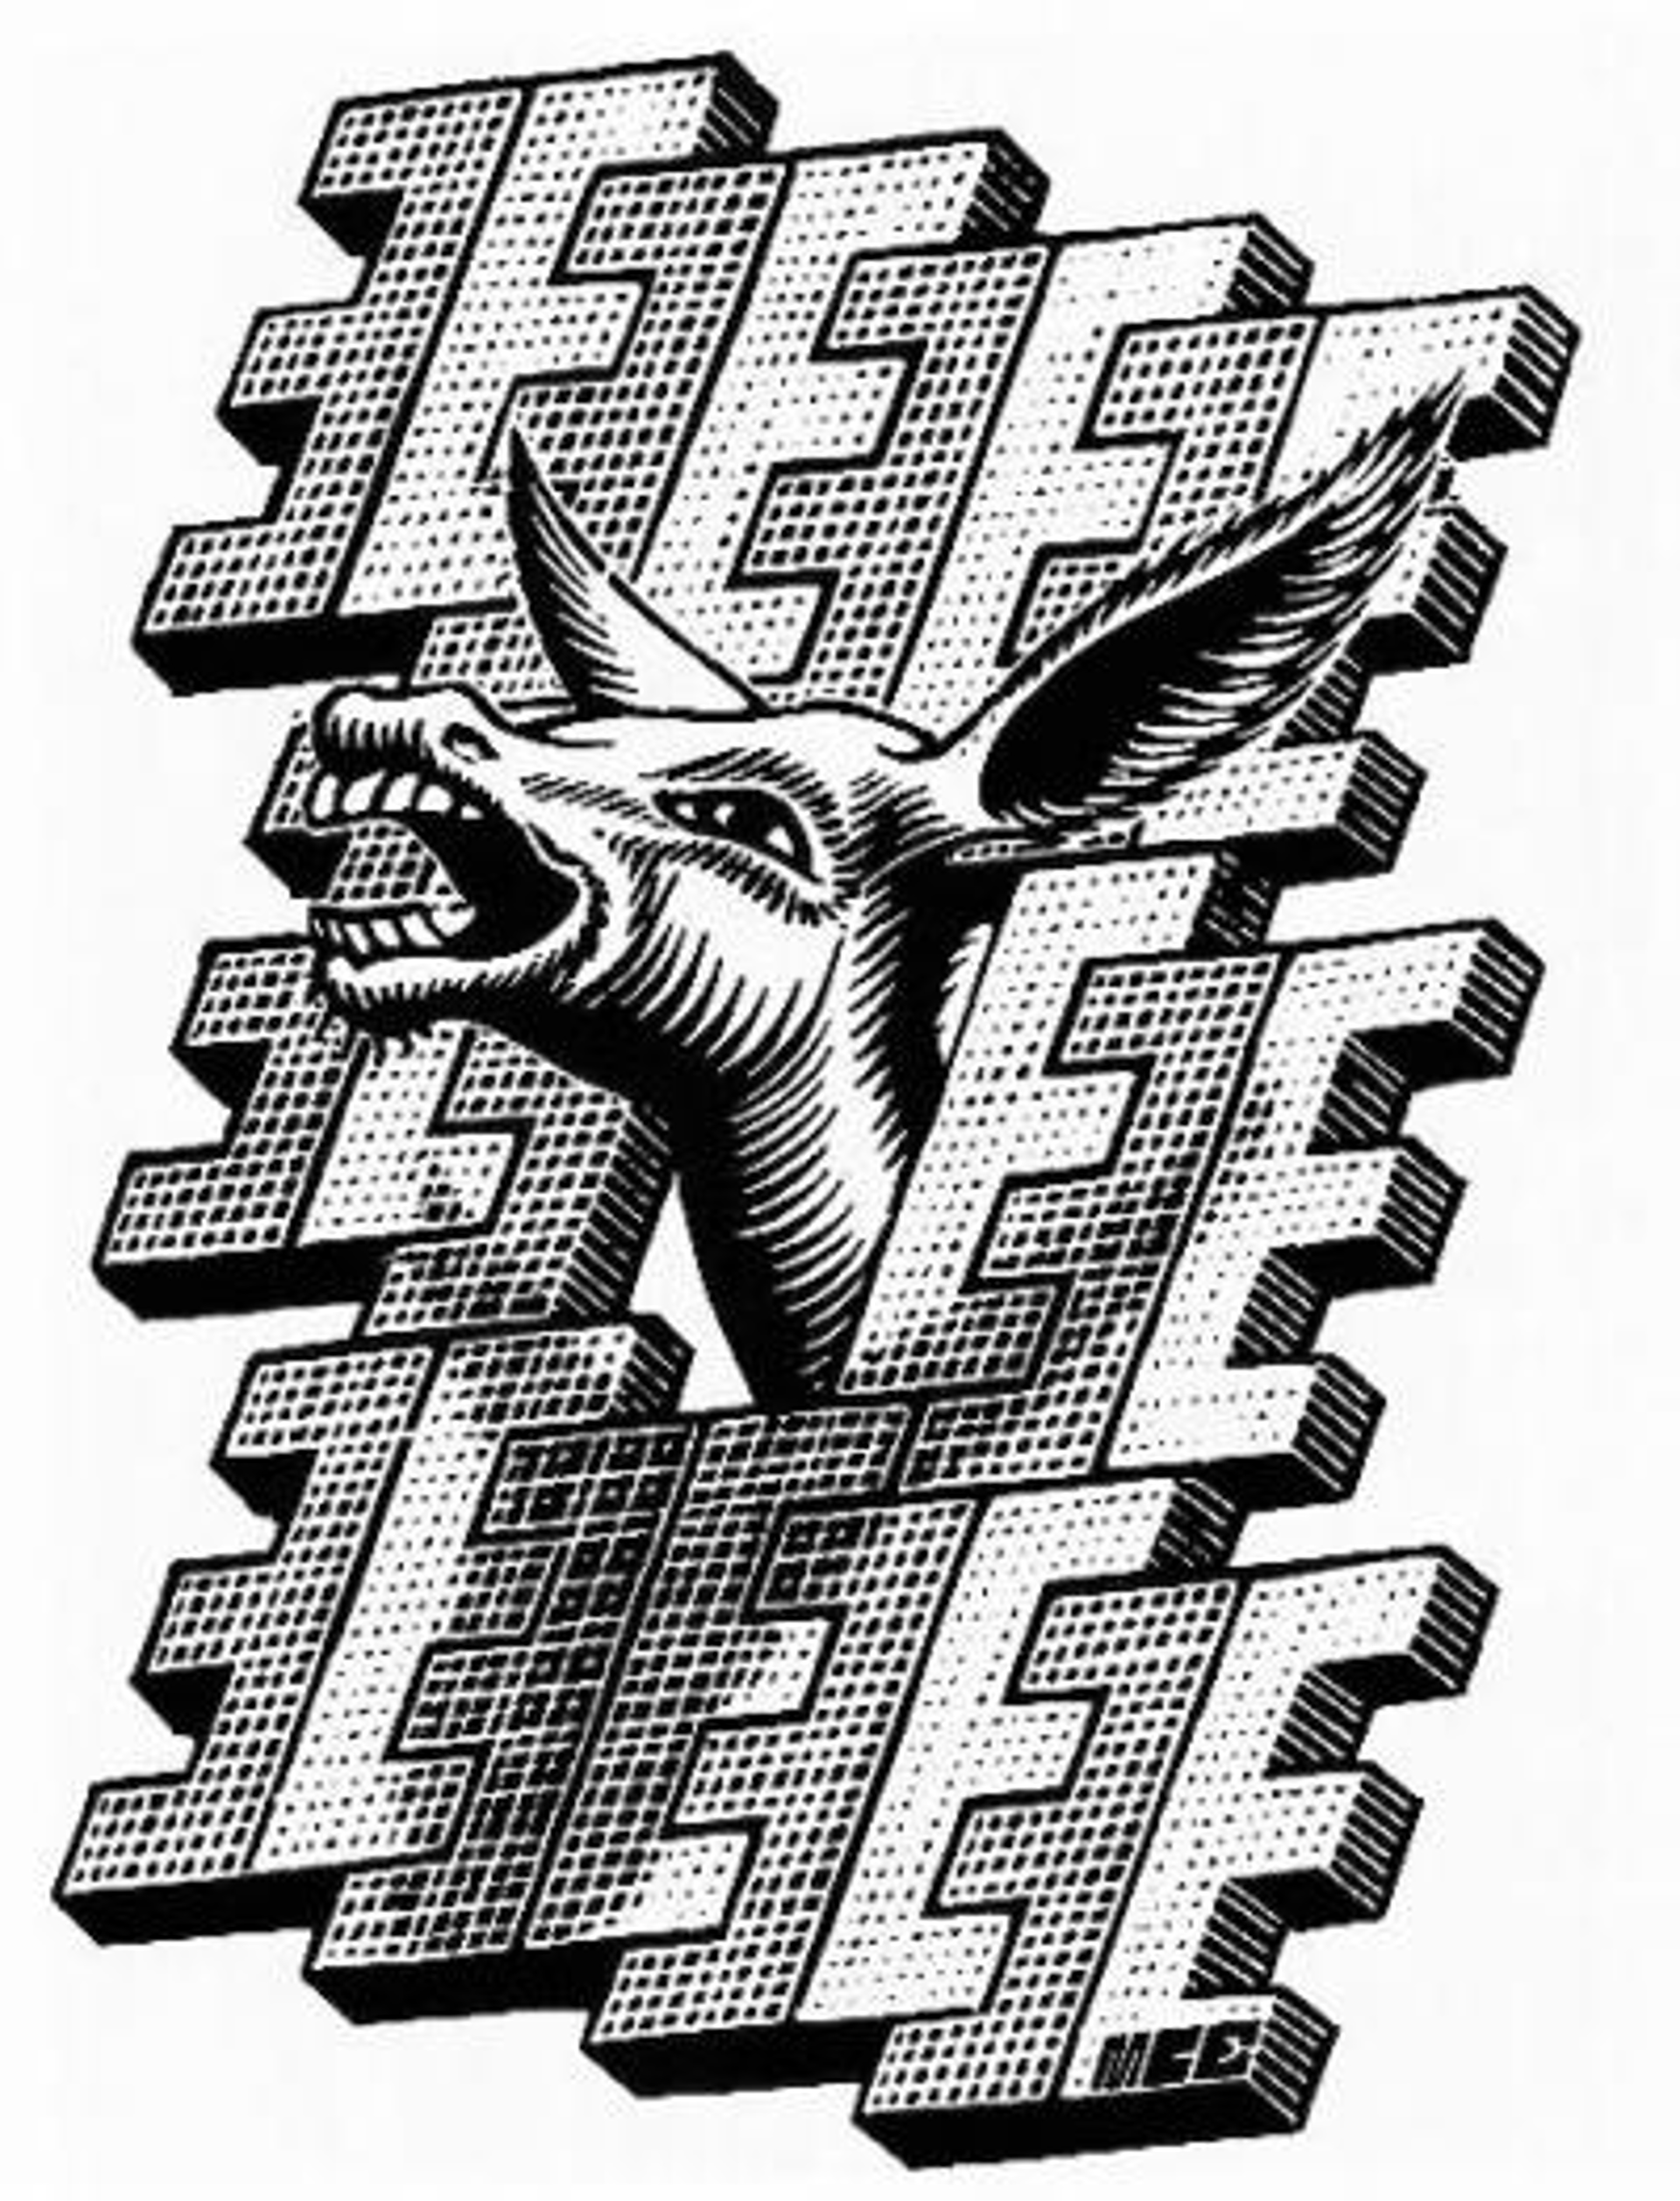 E is for Ezel (Donkey) by M.C. Escher